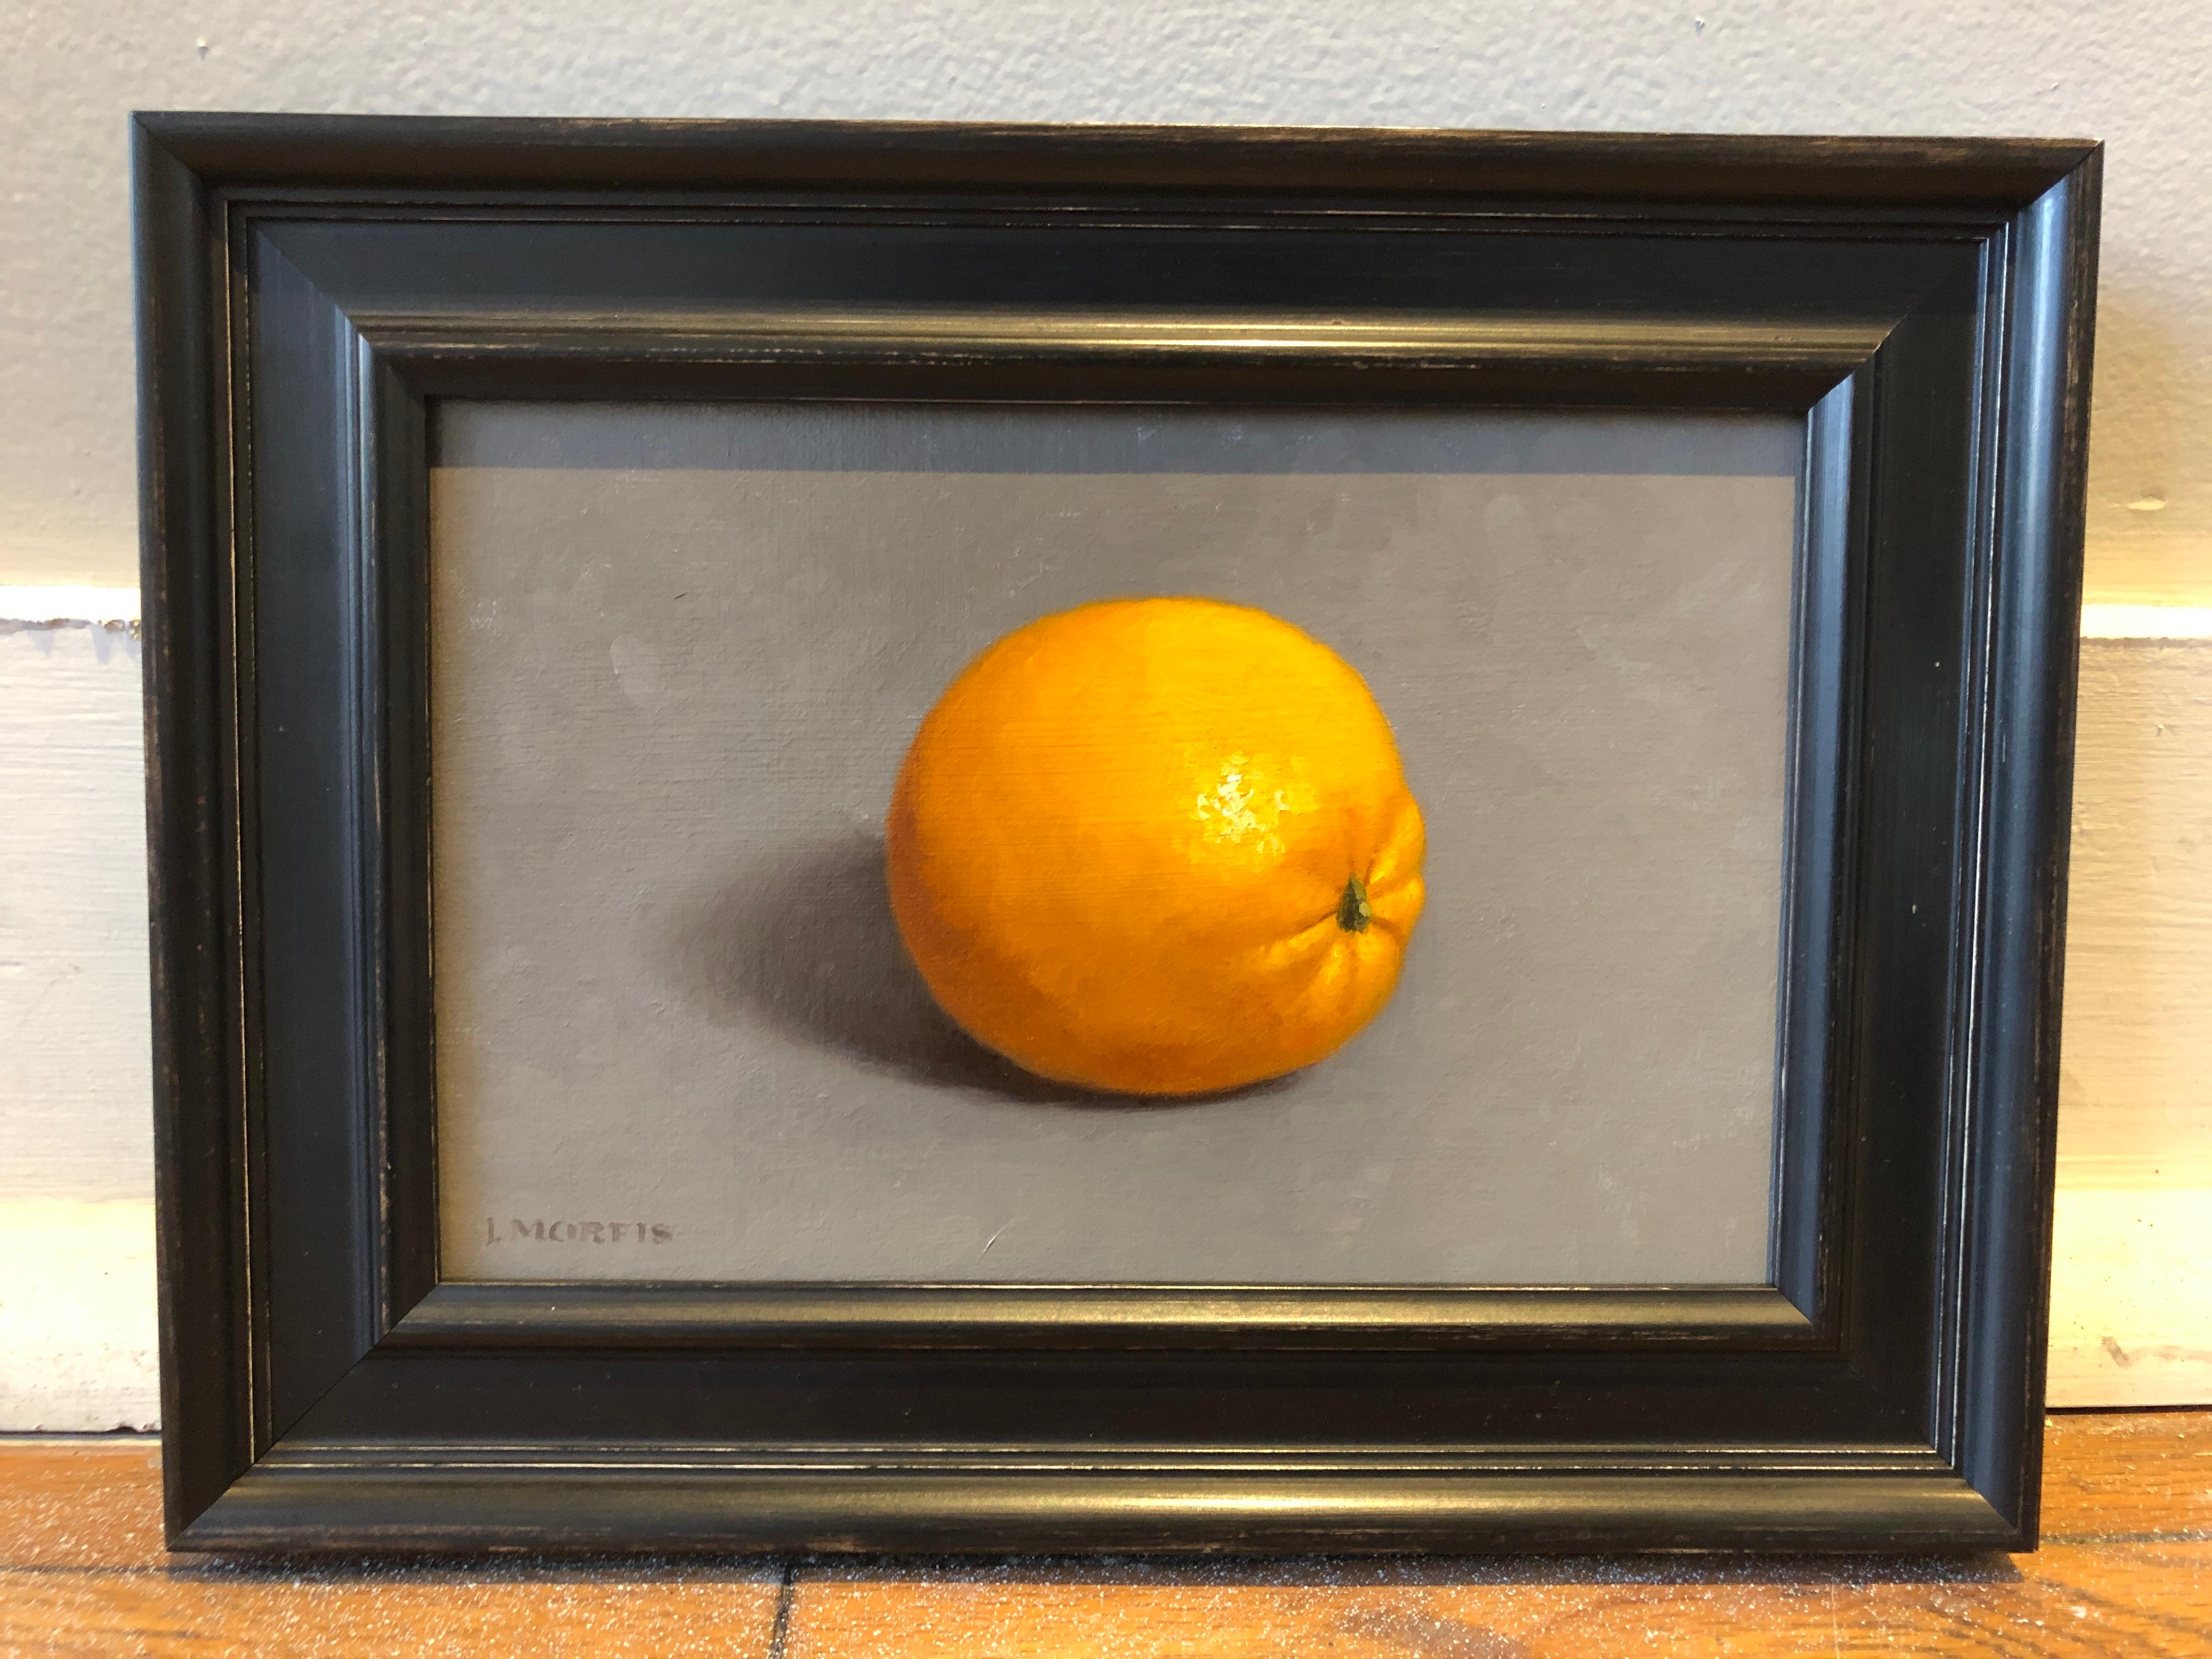 Lonely Orange - Painting by John Morfis